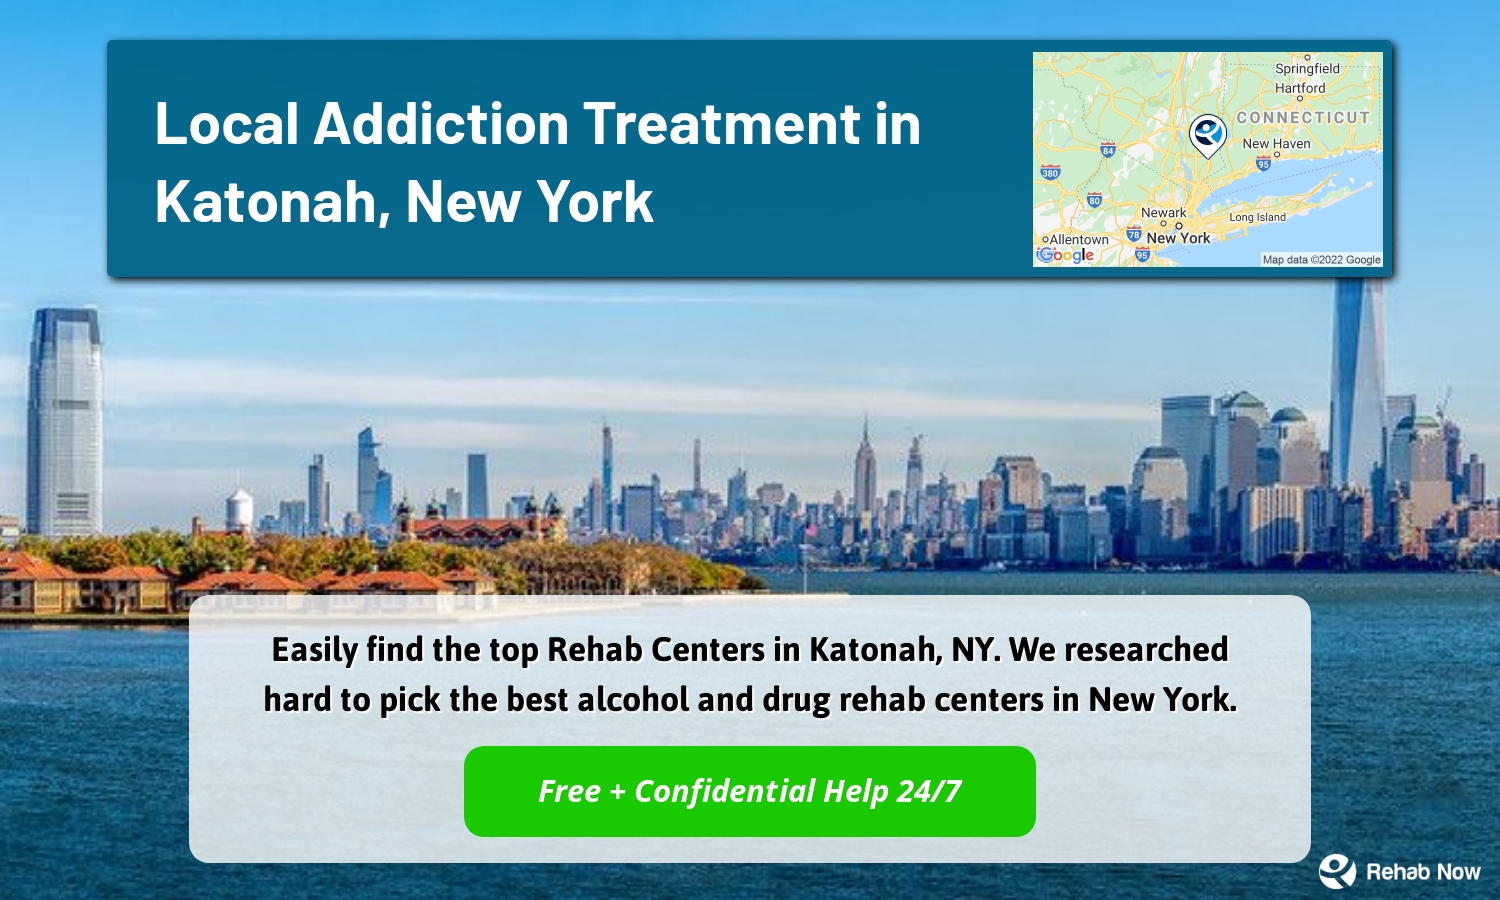 Easily find the top Rehab Centers in Katonah, NY. We researched hard to pick the best alcohol and drug rehab centers in New York.